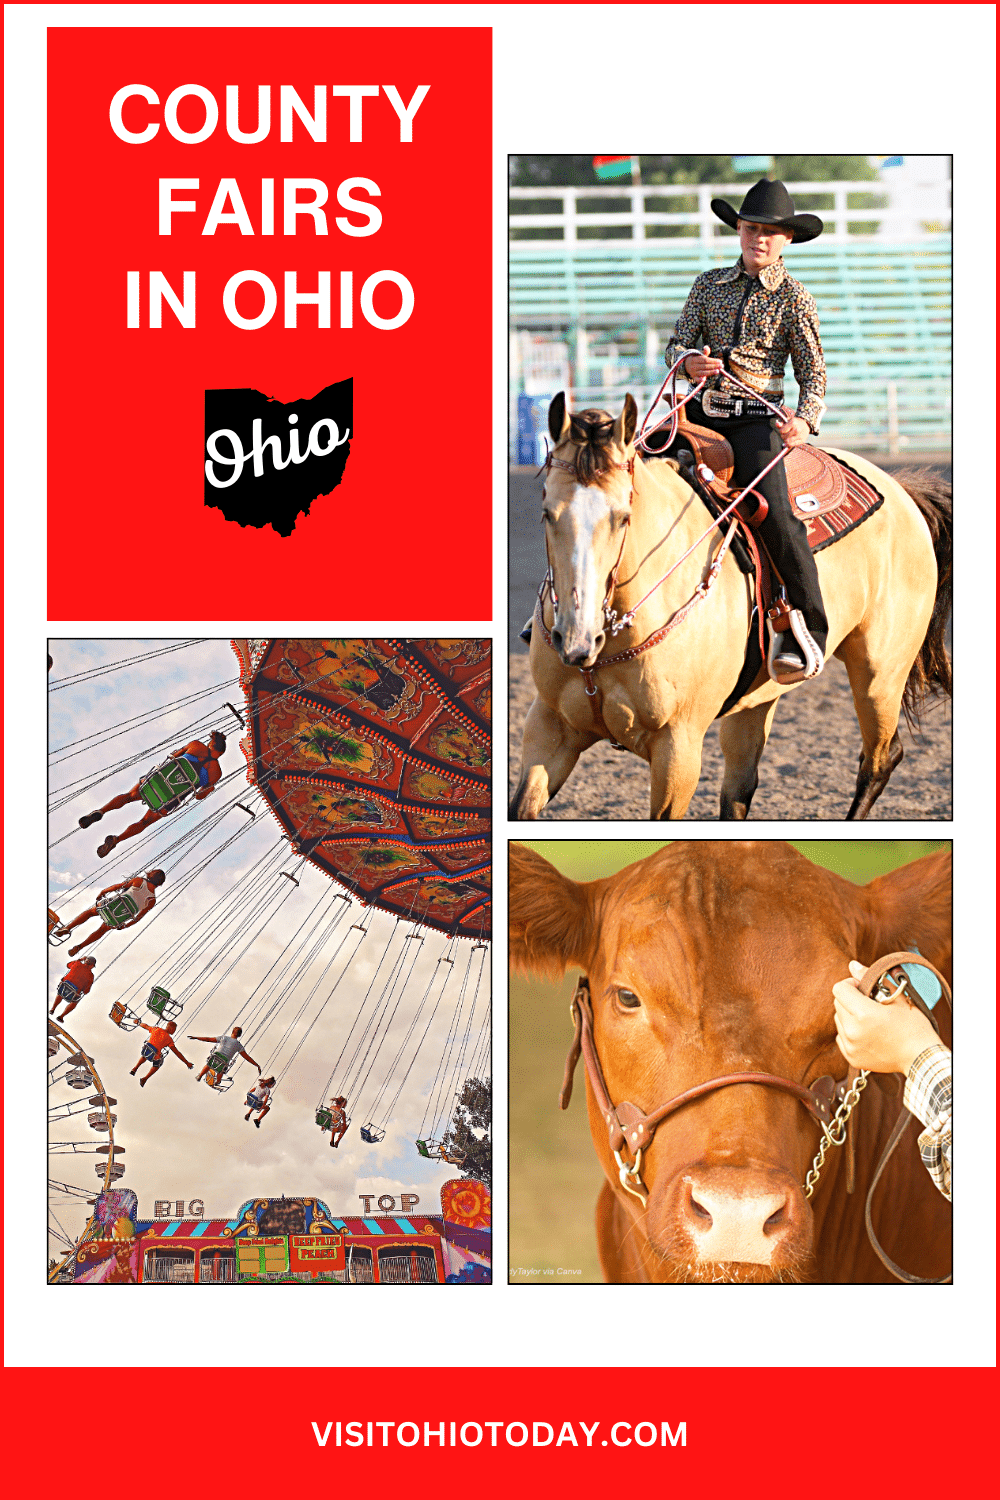 vertical image with a photo of people on a swing carousel, a photo of a boy on a rodeo horse, and a photo of a show cow. A red area in the top left has the text County Fairs in Ohio